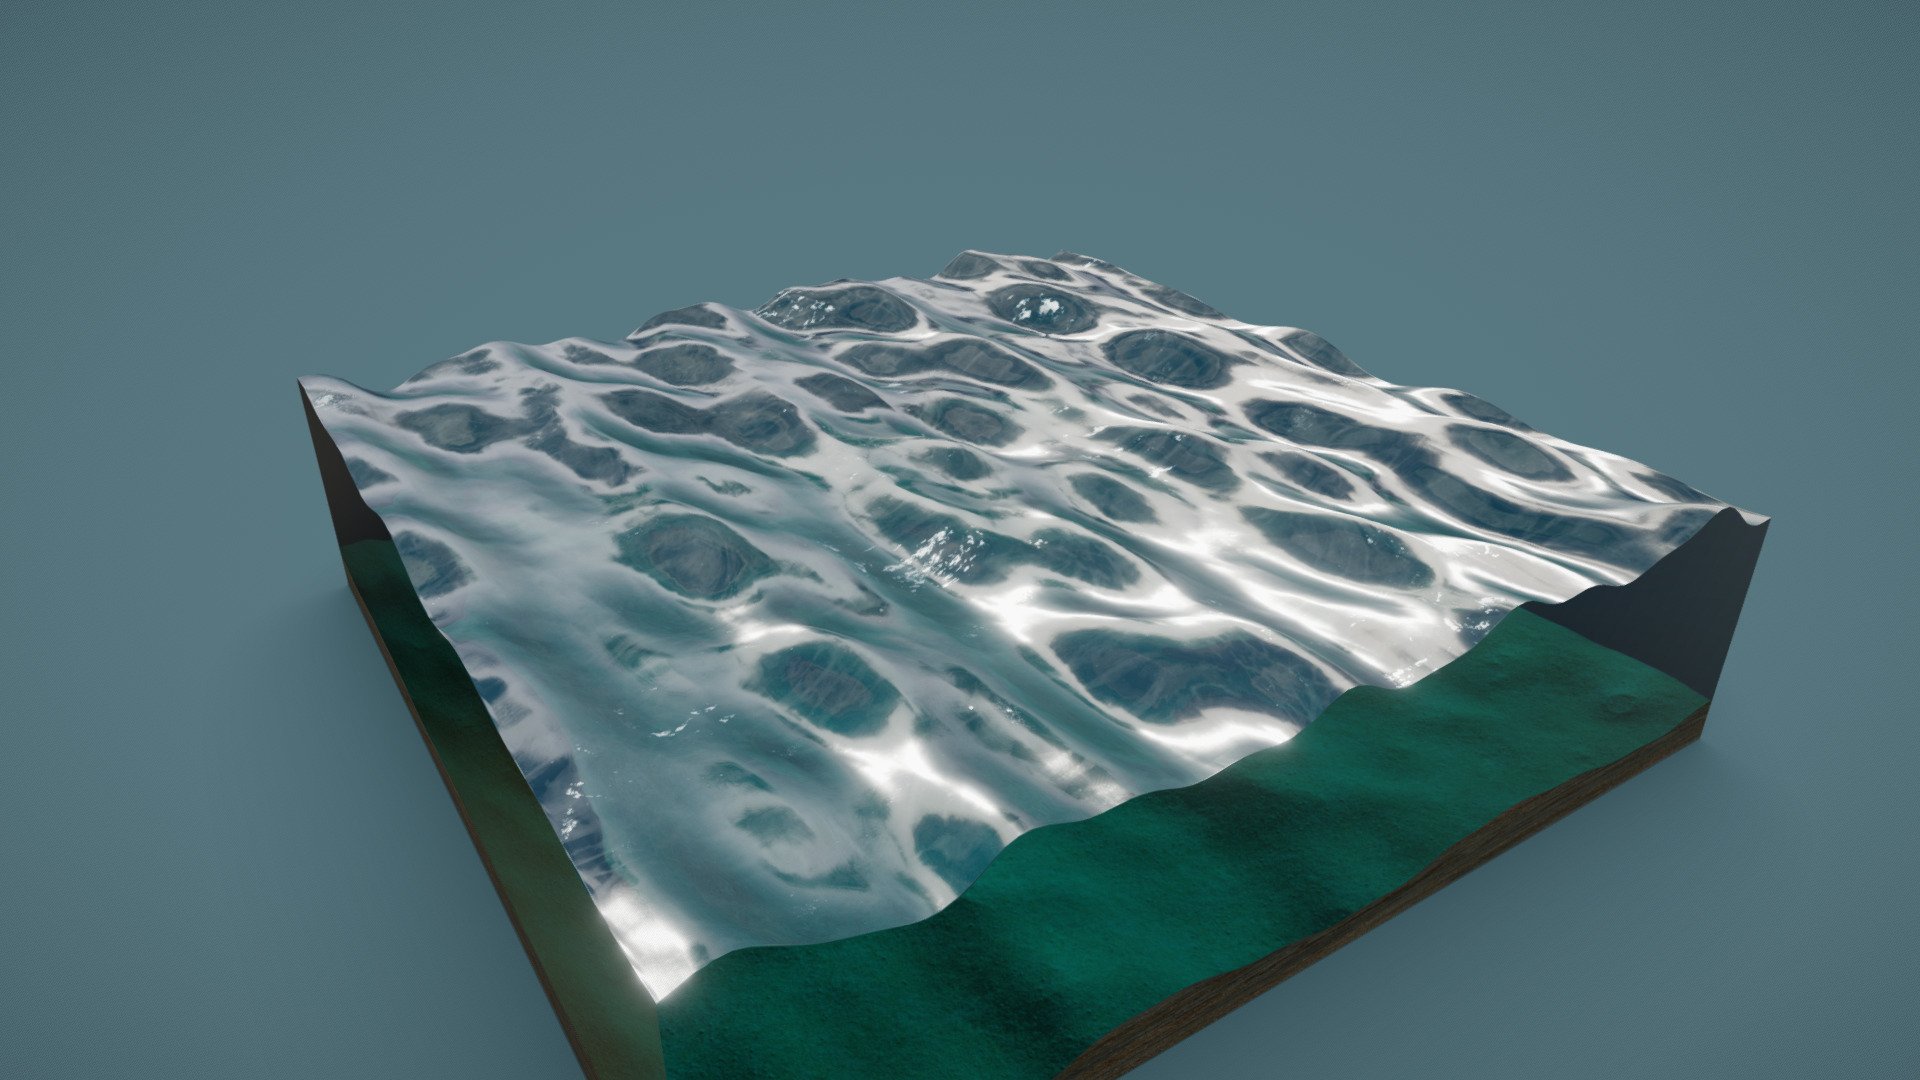 A slice of ocean created using trochoidal (or Gerstner) waves. Modelled in Houdini, the undulations of the base mesh have been created by summing simple sine functions. These techniques are often used to create large bodies of water in real-time environments, a small cross section is used here to keep polygon count managable. 

Based on equations covered in chapter 1 of GPU Gems, a compilation of articles covering practical real-time graphics techniques 3d model